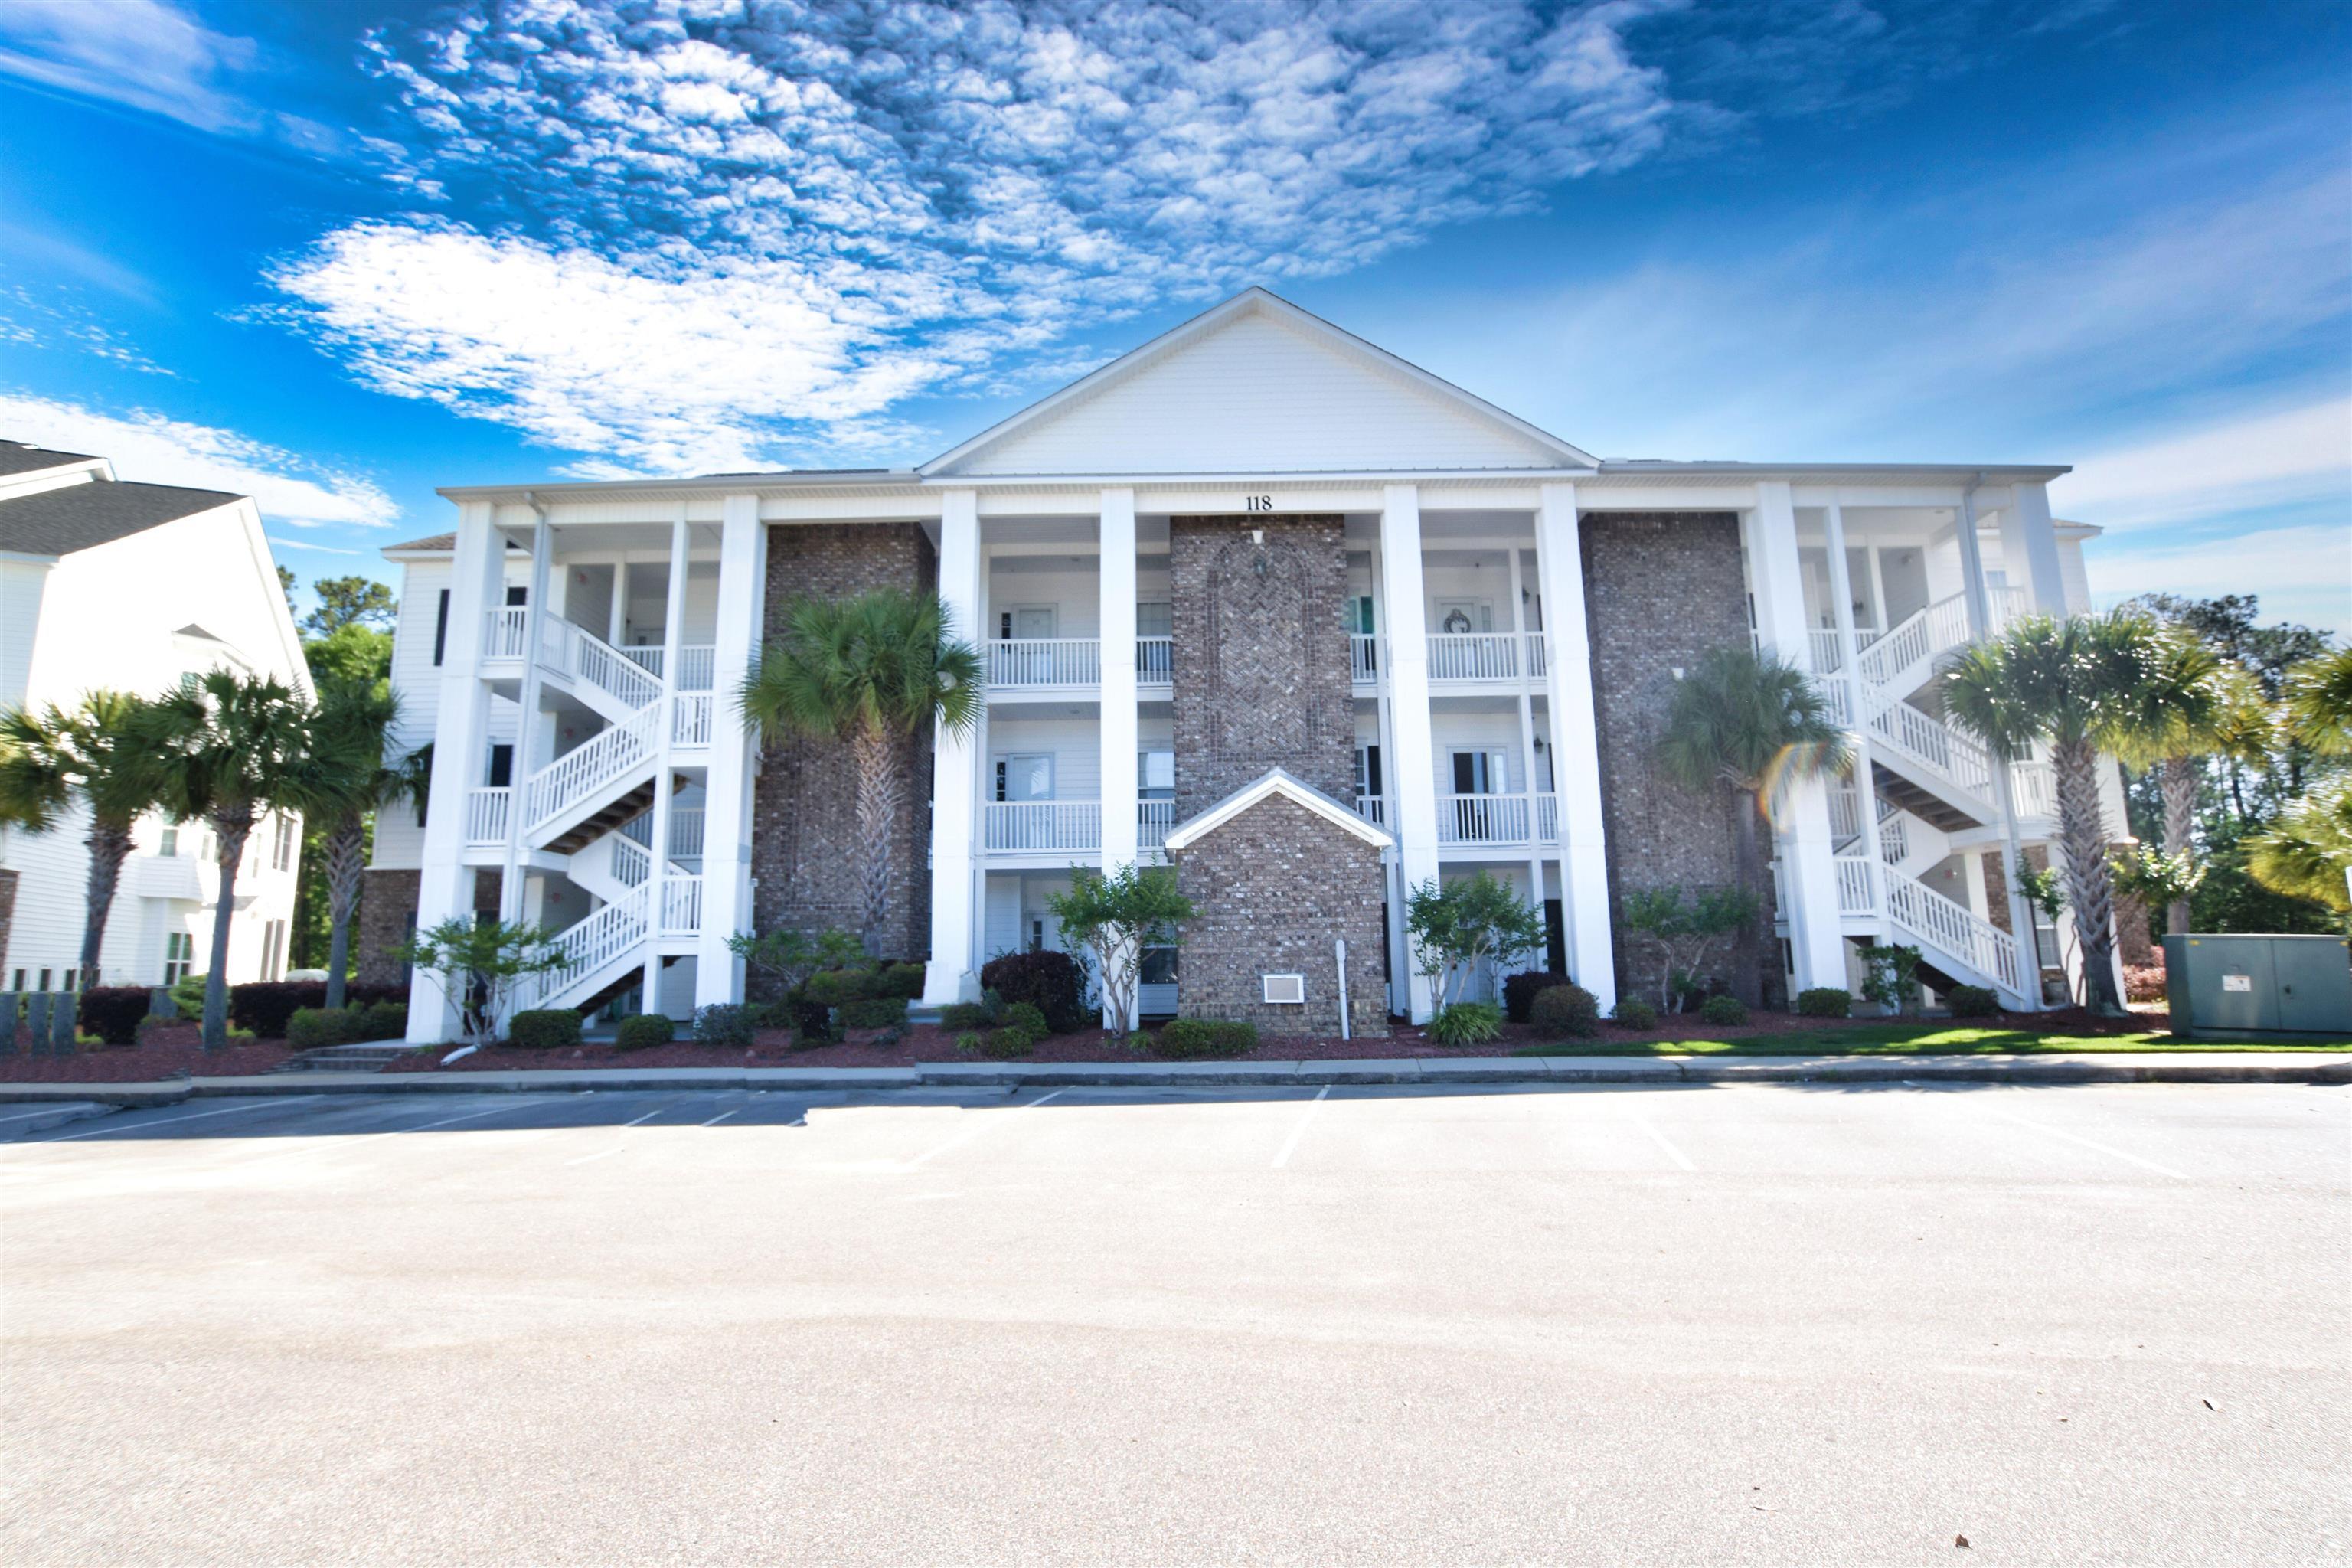 discover your dream condo in the desirable surfside beach area! nestled on the first floor of the gated birch n coppice community, this spacious 3-bedroom, 2-bathroom condo offers an ideal location off glenns bay road, with convenient access to both highway 17 bypass and highway 17 business. this prime positioning allows easy access to all the attractions surfside beach has to offer.  step inside to find an inviting open foyer that cleverly separates two generously-sized secondary bedrooms. venture further into the heart of the home where a chic kitchen and dining area await. adorned with granite countertops, stainless steel appliances, and elegant tiled flooring, it’s an ideal space for both cooking and entertaining. the adjacent living area, with its laminate wood flooring, chair rail, and crown molding, provides a warm and welcoming atmosphere.  extend your living space outdoors with a screened, covered porch—the perfect retreat for unwinding in the evenings or enjoying a gentle night breeze in privacy. the master suite is impressively large, featuring dual sinks and an oversized tub-shower combo in the master bath, promising a spa-like experience.  this cozy condo is more than just a place to live—it's a canvas awaiting your personal touch. don’t miss the chance to make it yours. schedule your viewing today and step closer to living your coastal dream!